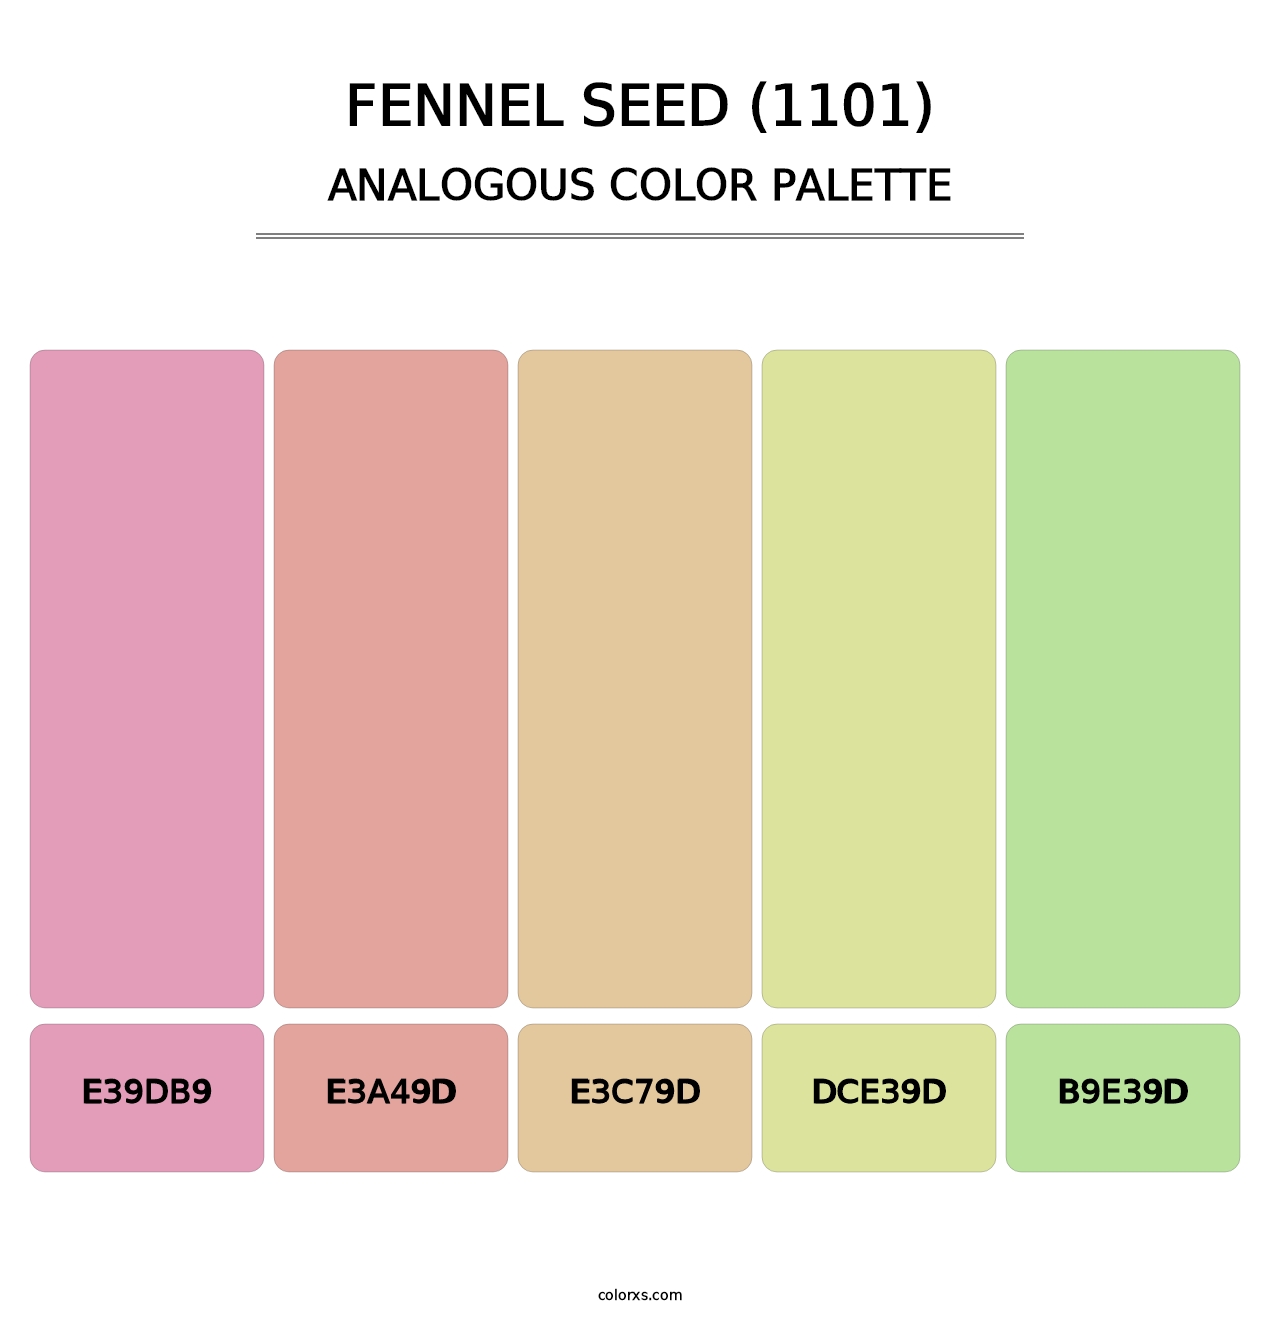 Fennel Seed (1101) - Analogous Color Palette